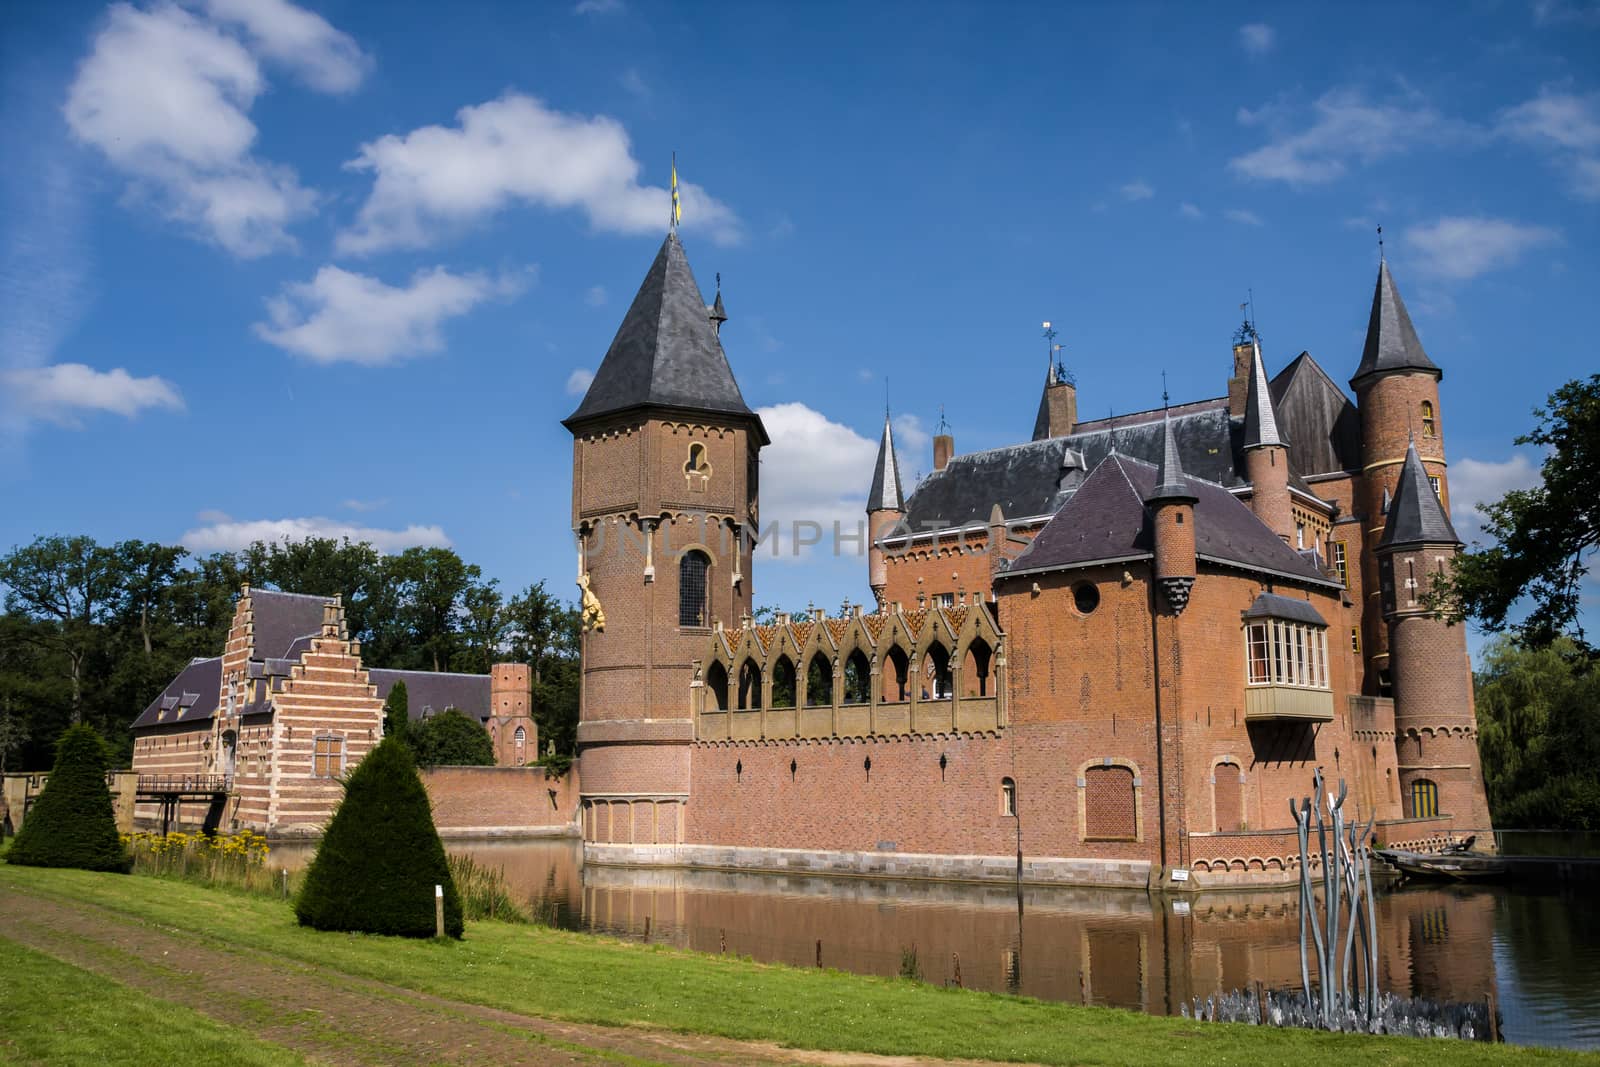 Heeswijk castle on the water in Nederland by rainfallsup